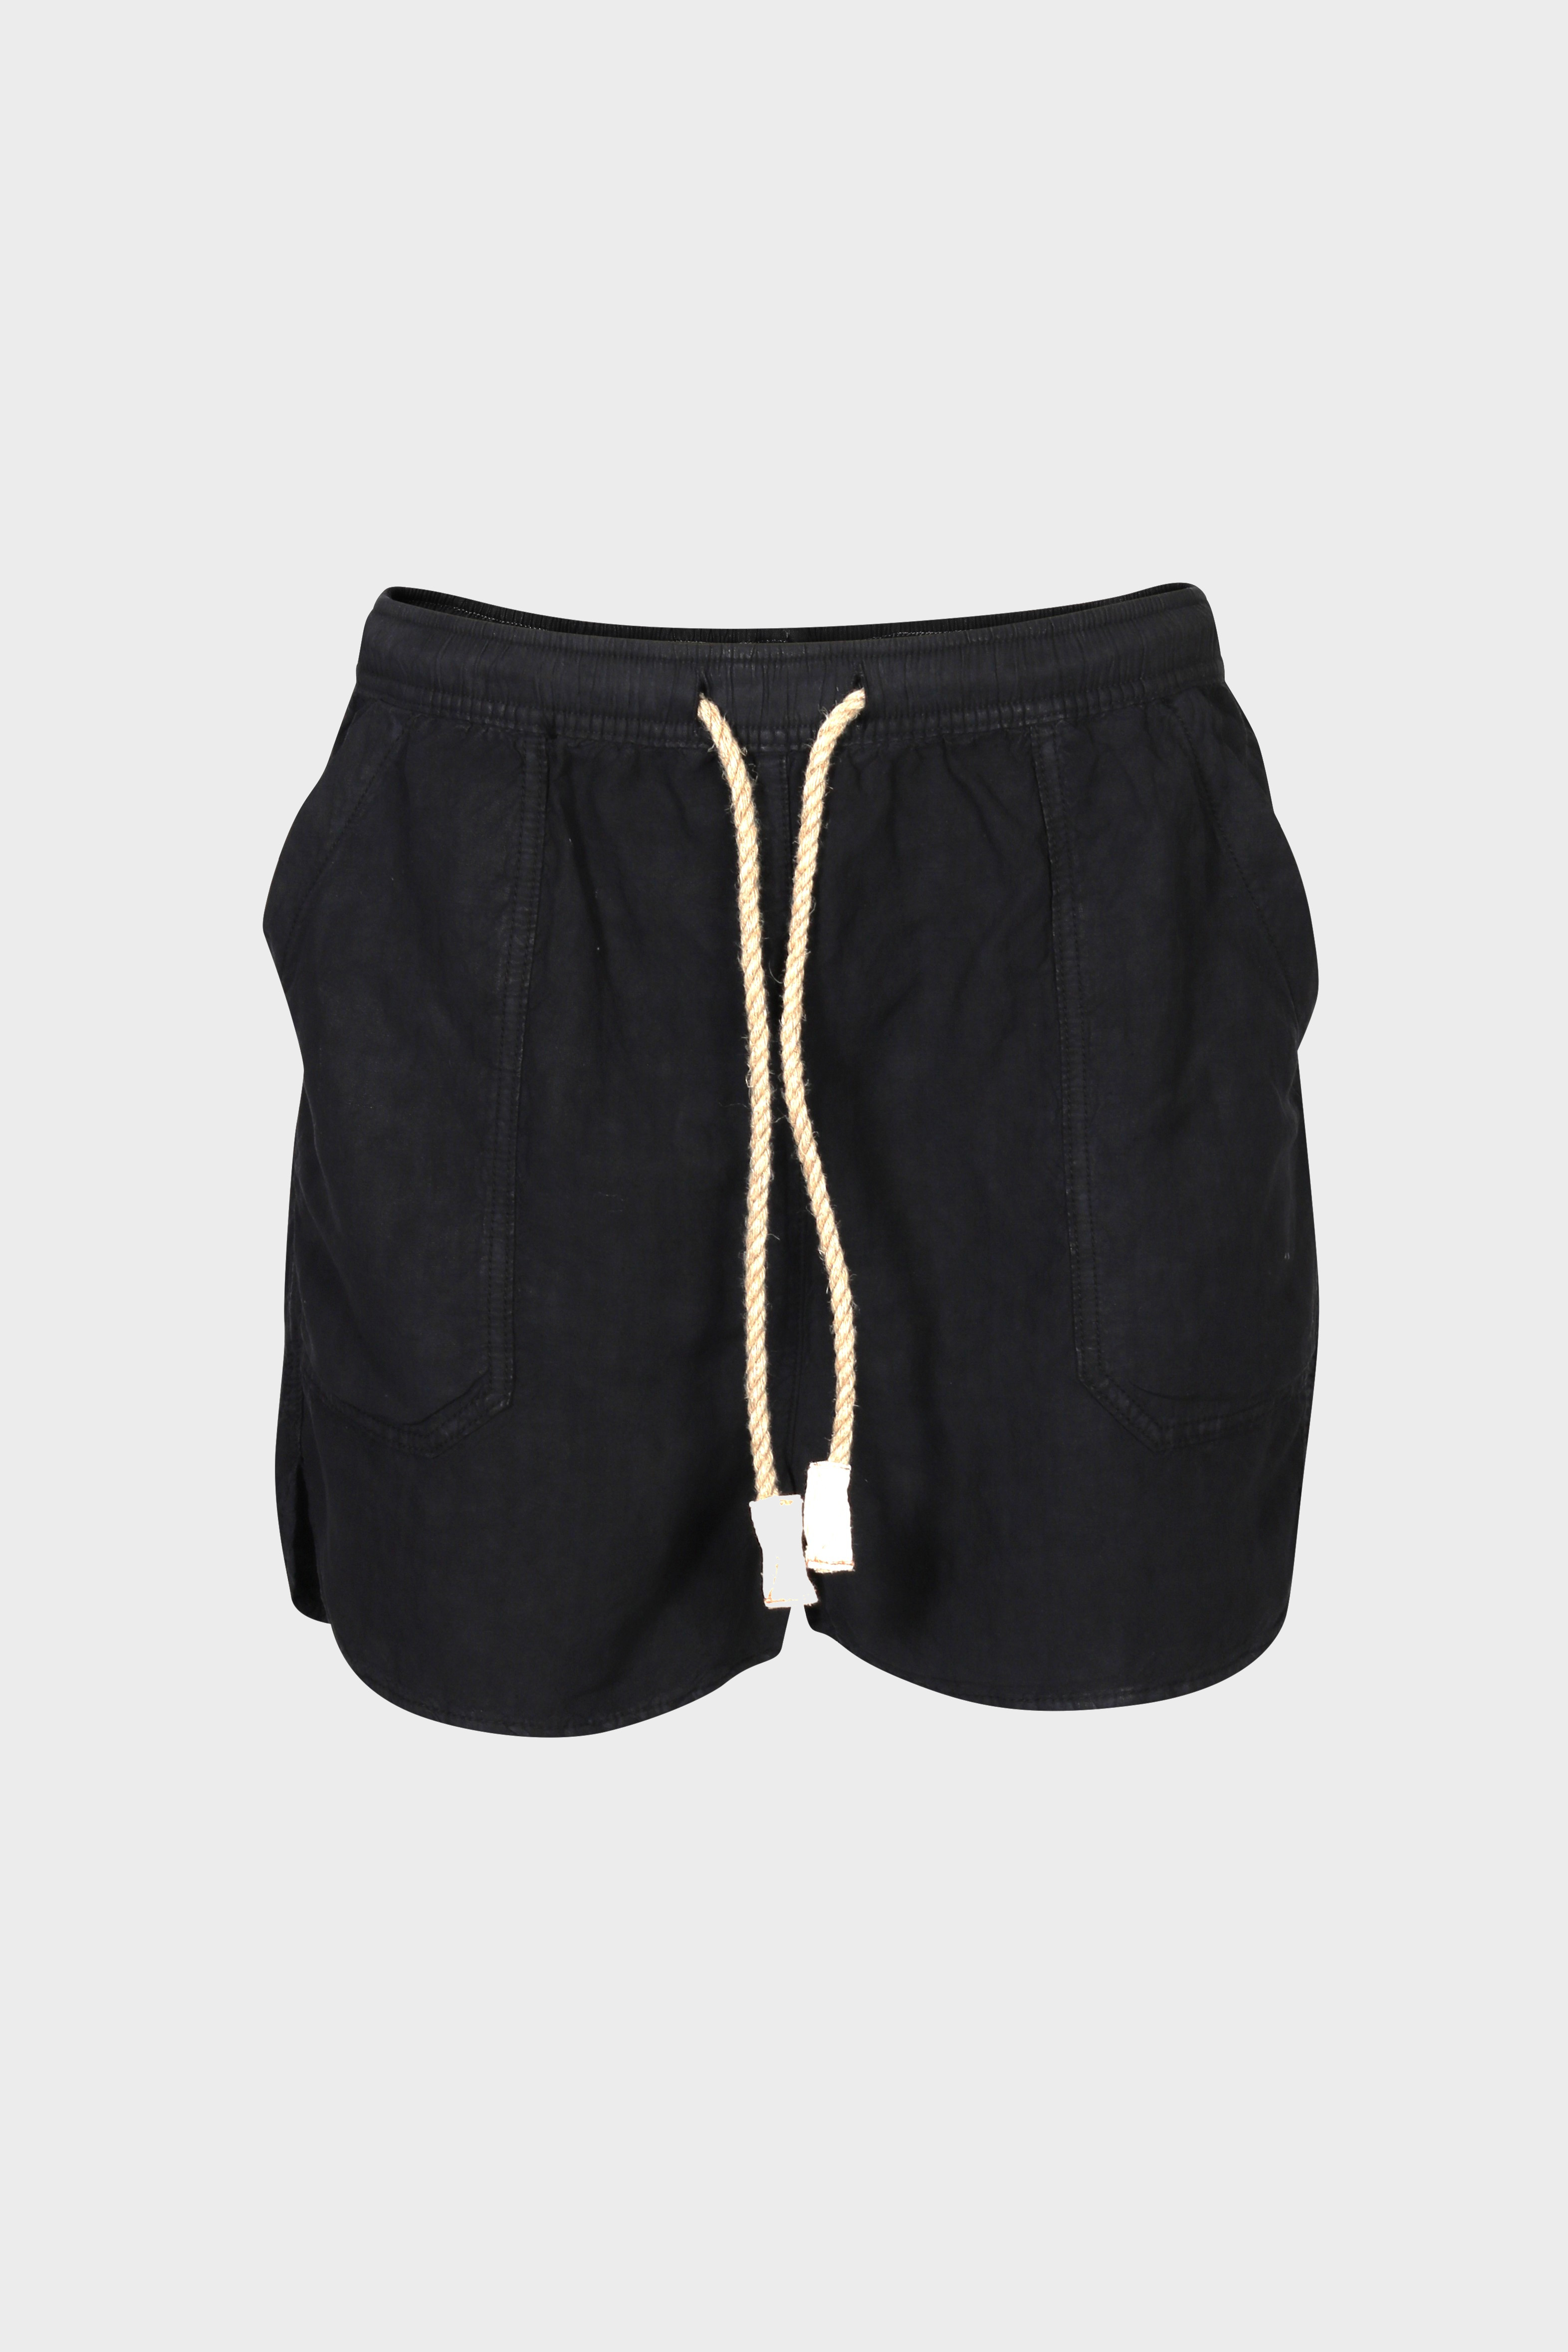 DR. COLLECTORS Weekend Silk Shorts in Black S